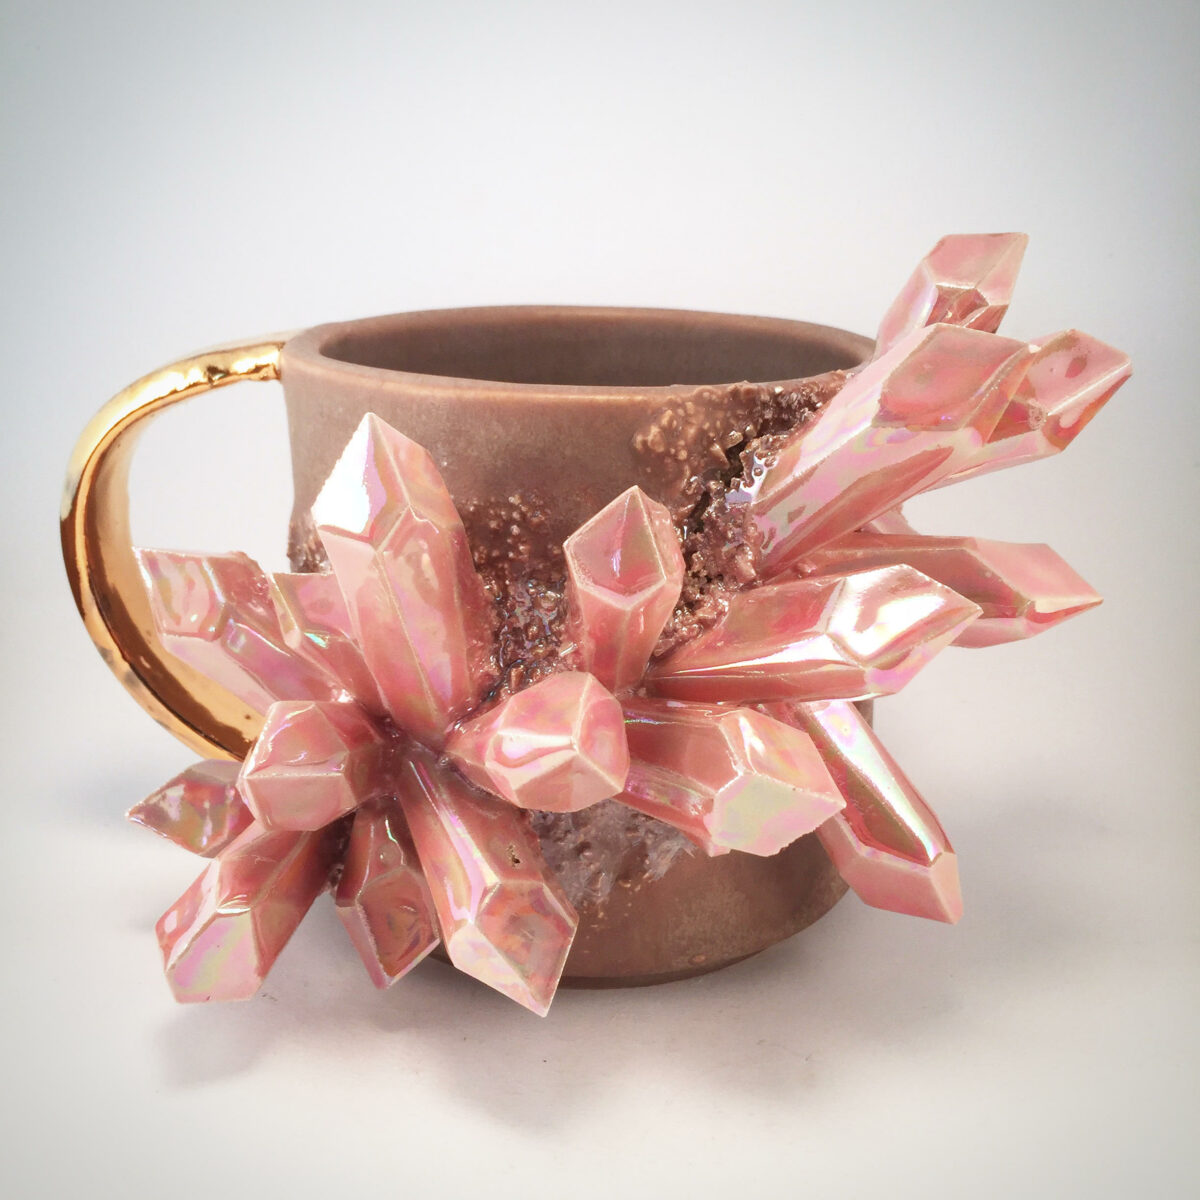 Lush Ceramic Vessels Decorated With Colorful Crystals By Collin Lynch 1